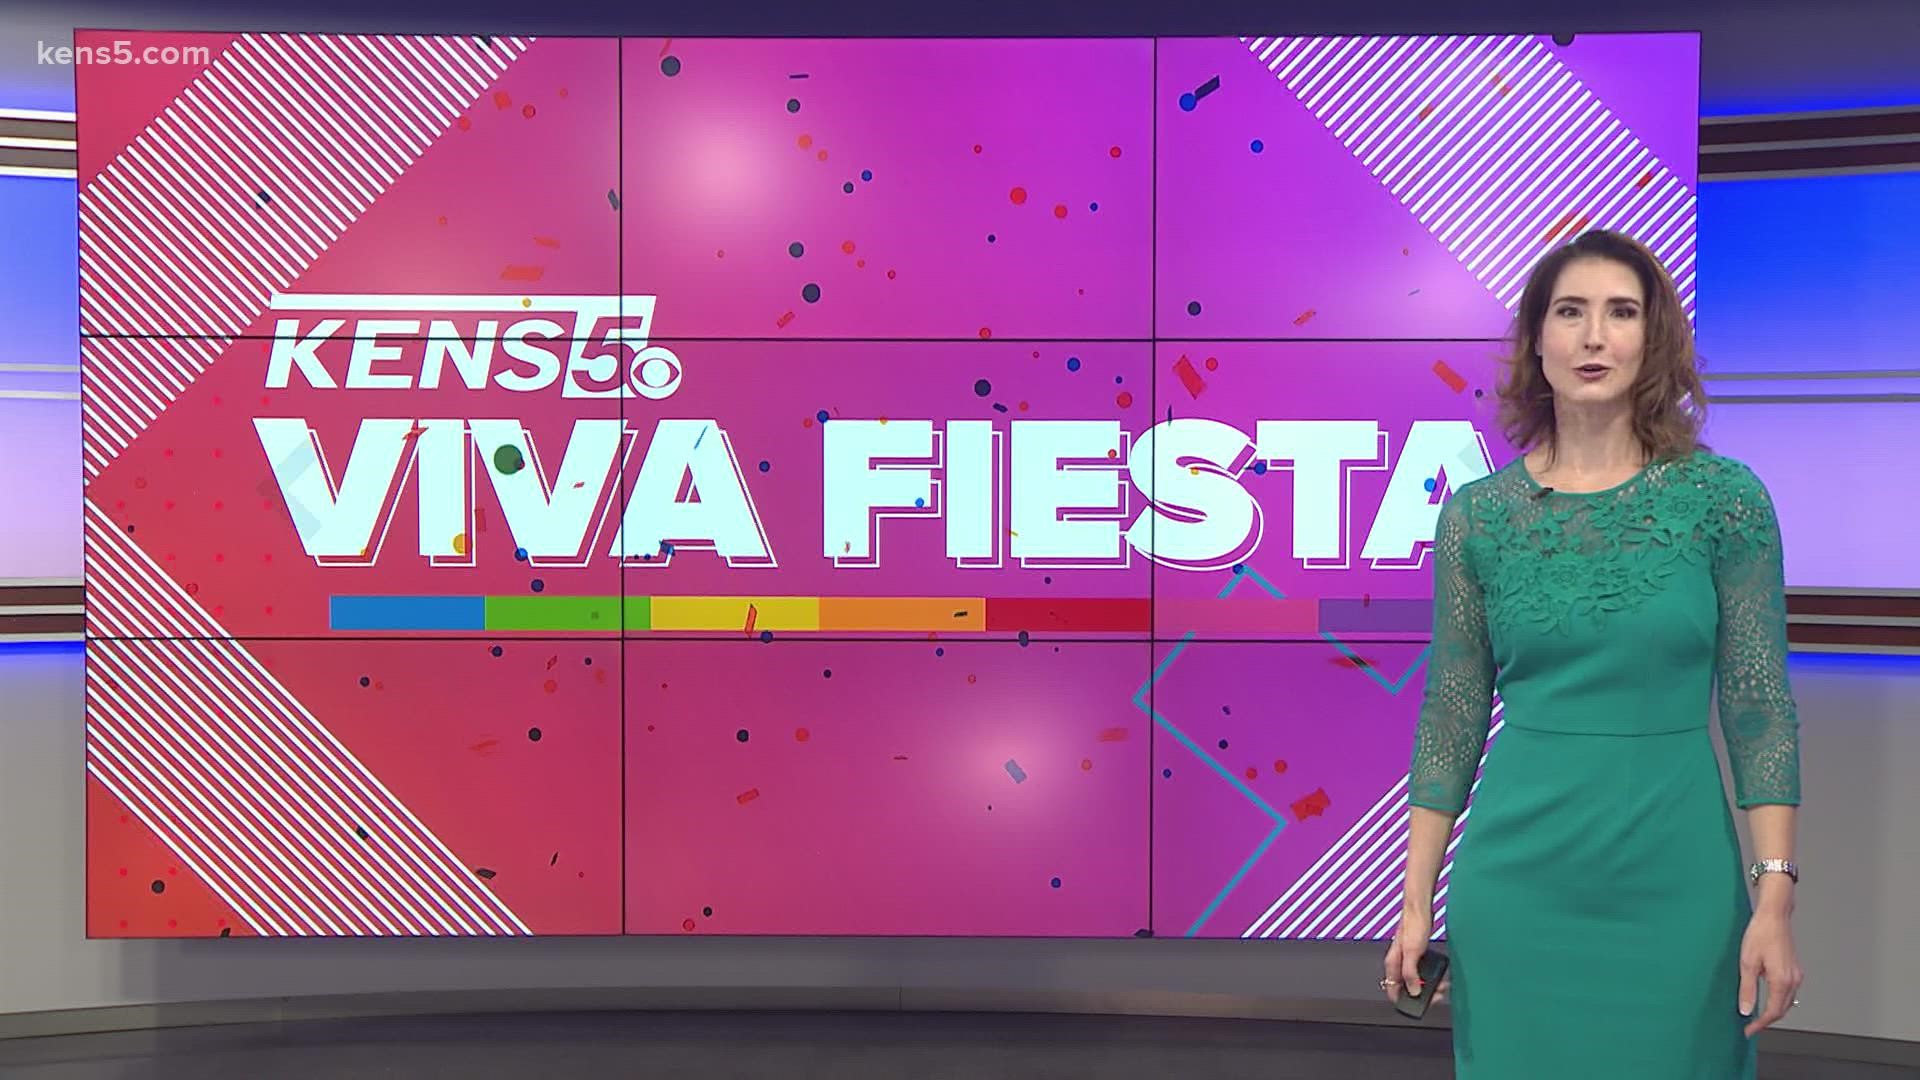 Fiesta is back in full force this year. Many are looking to celebrate but Fiesta activities can add up quickly.